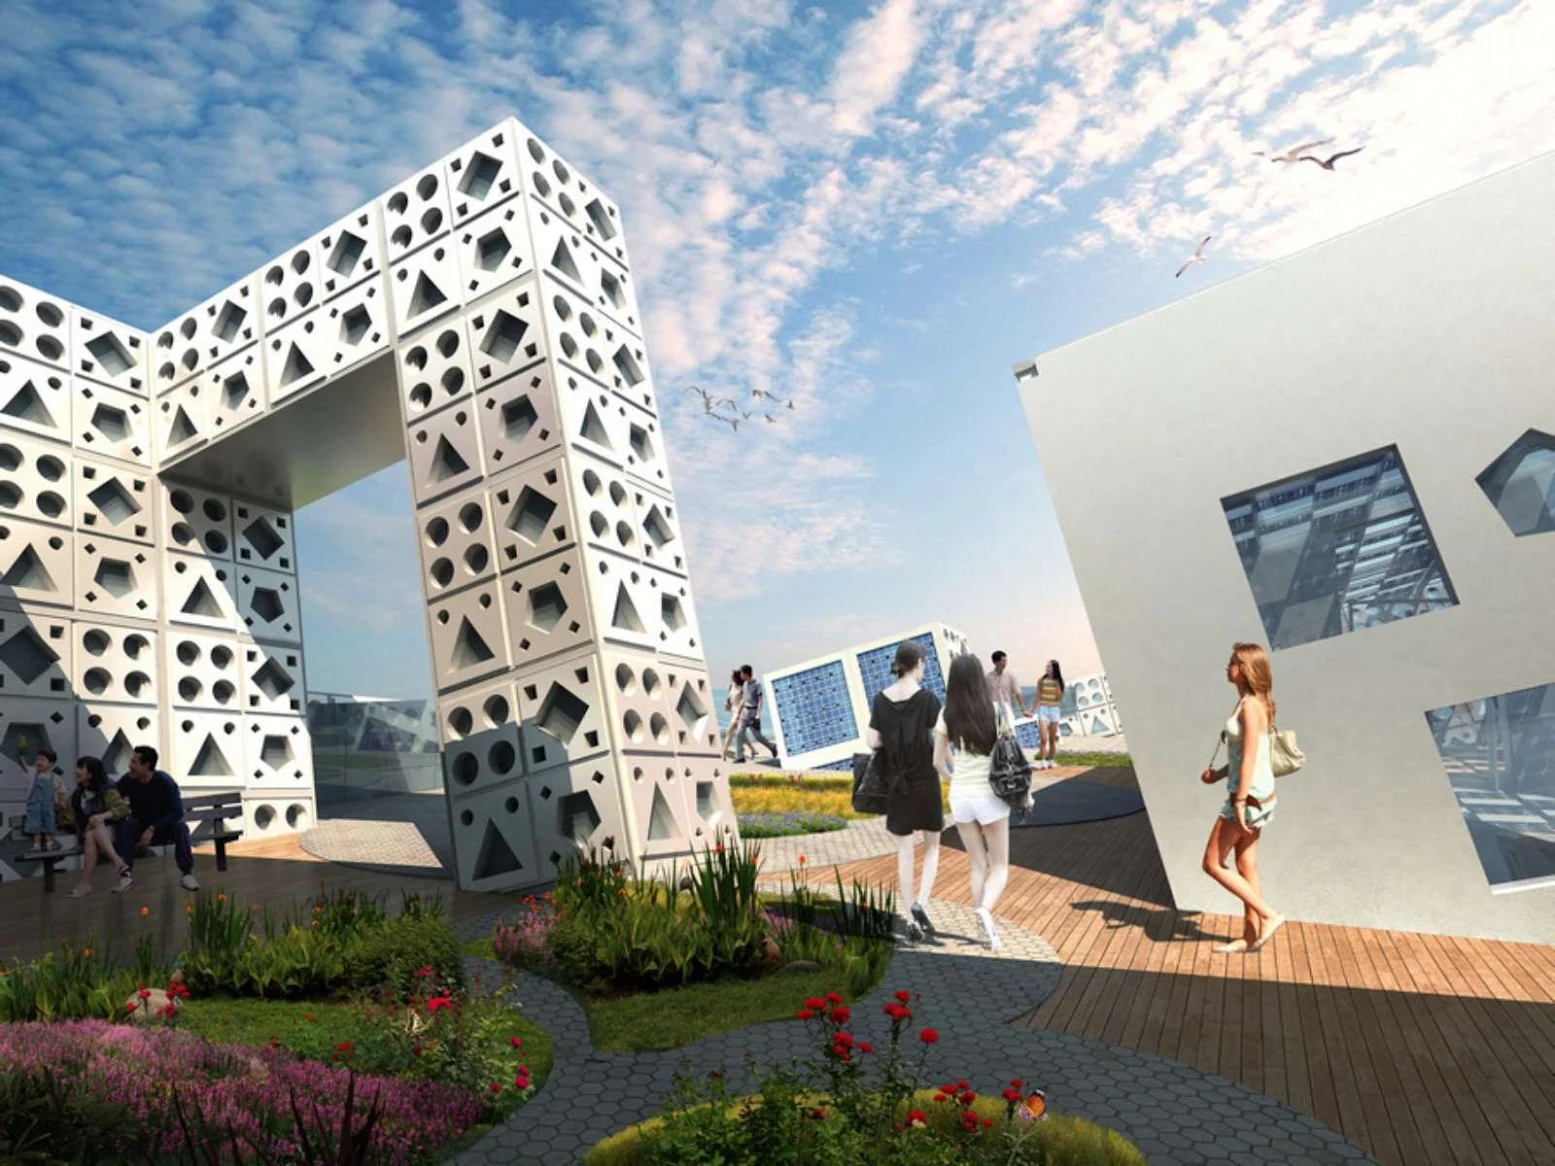 Cube bioinformatics Centre by TheeAe